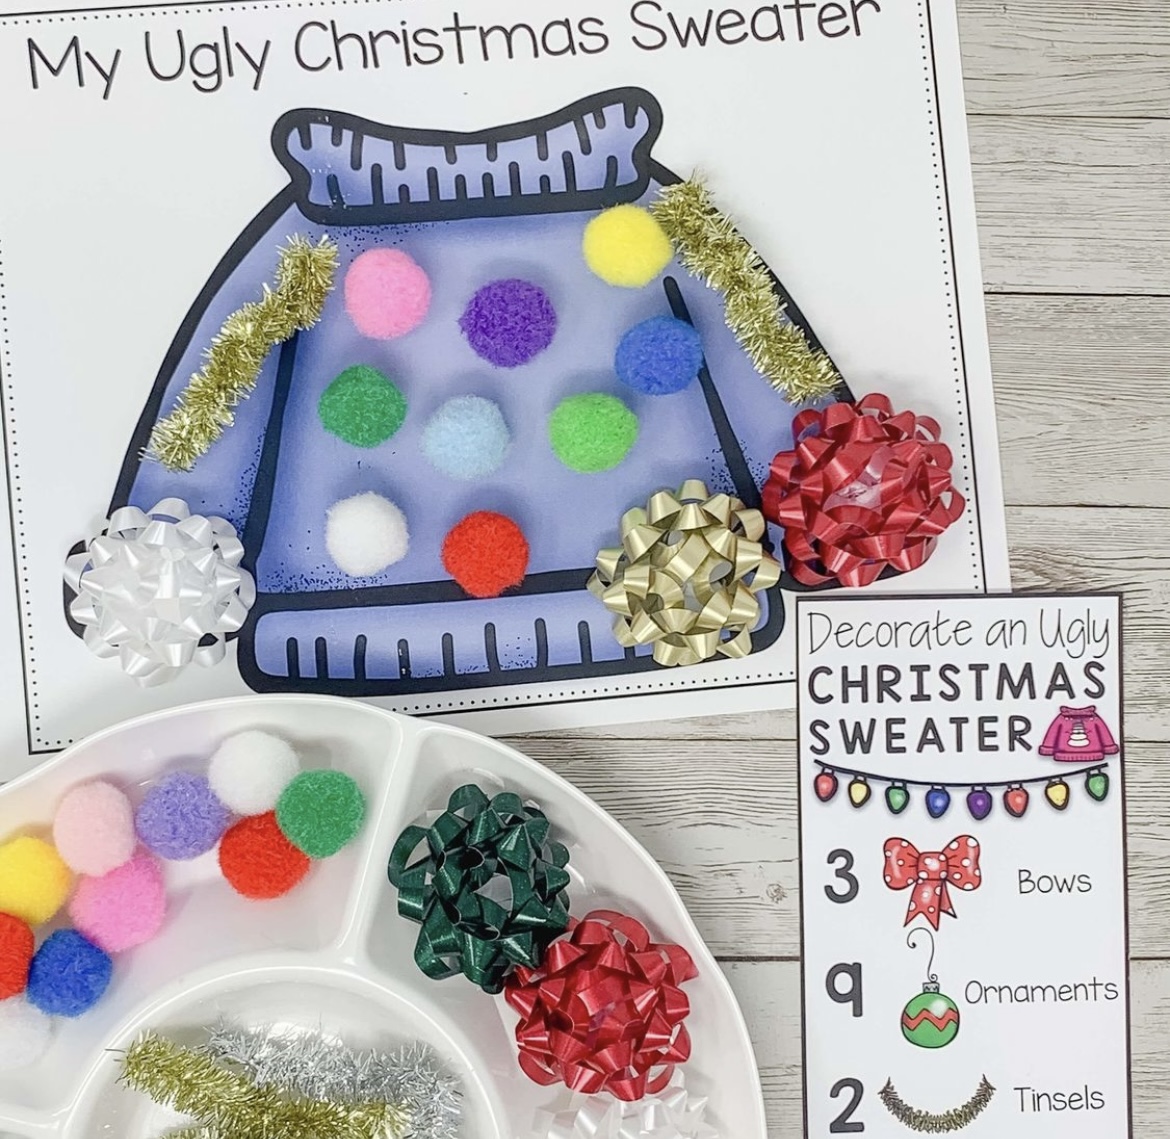 Christmas crafts, treats and play ideas